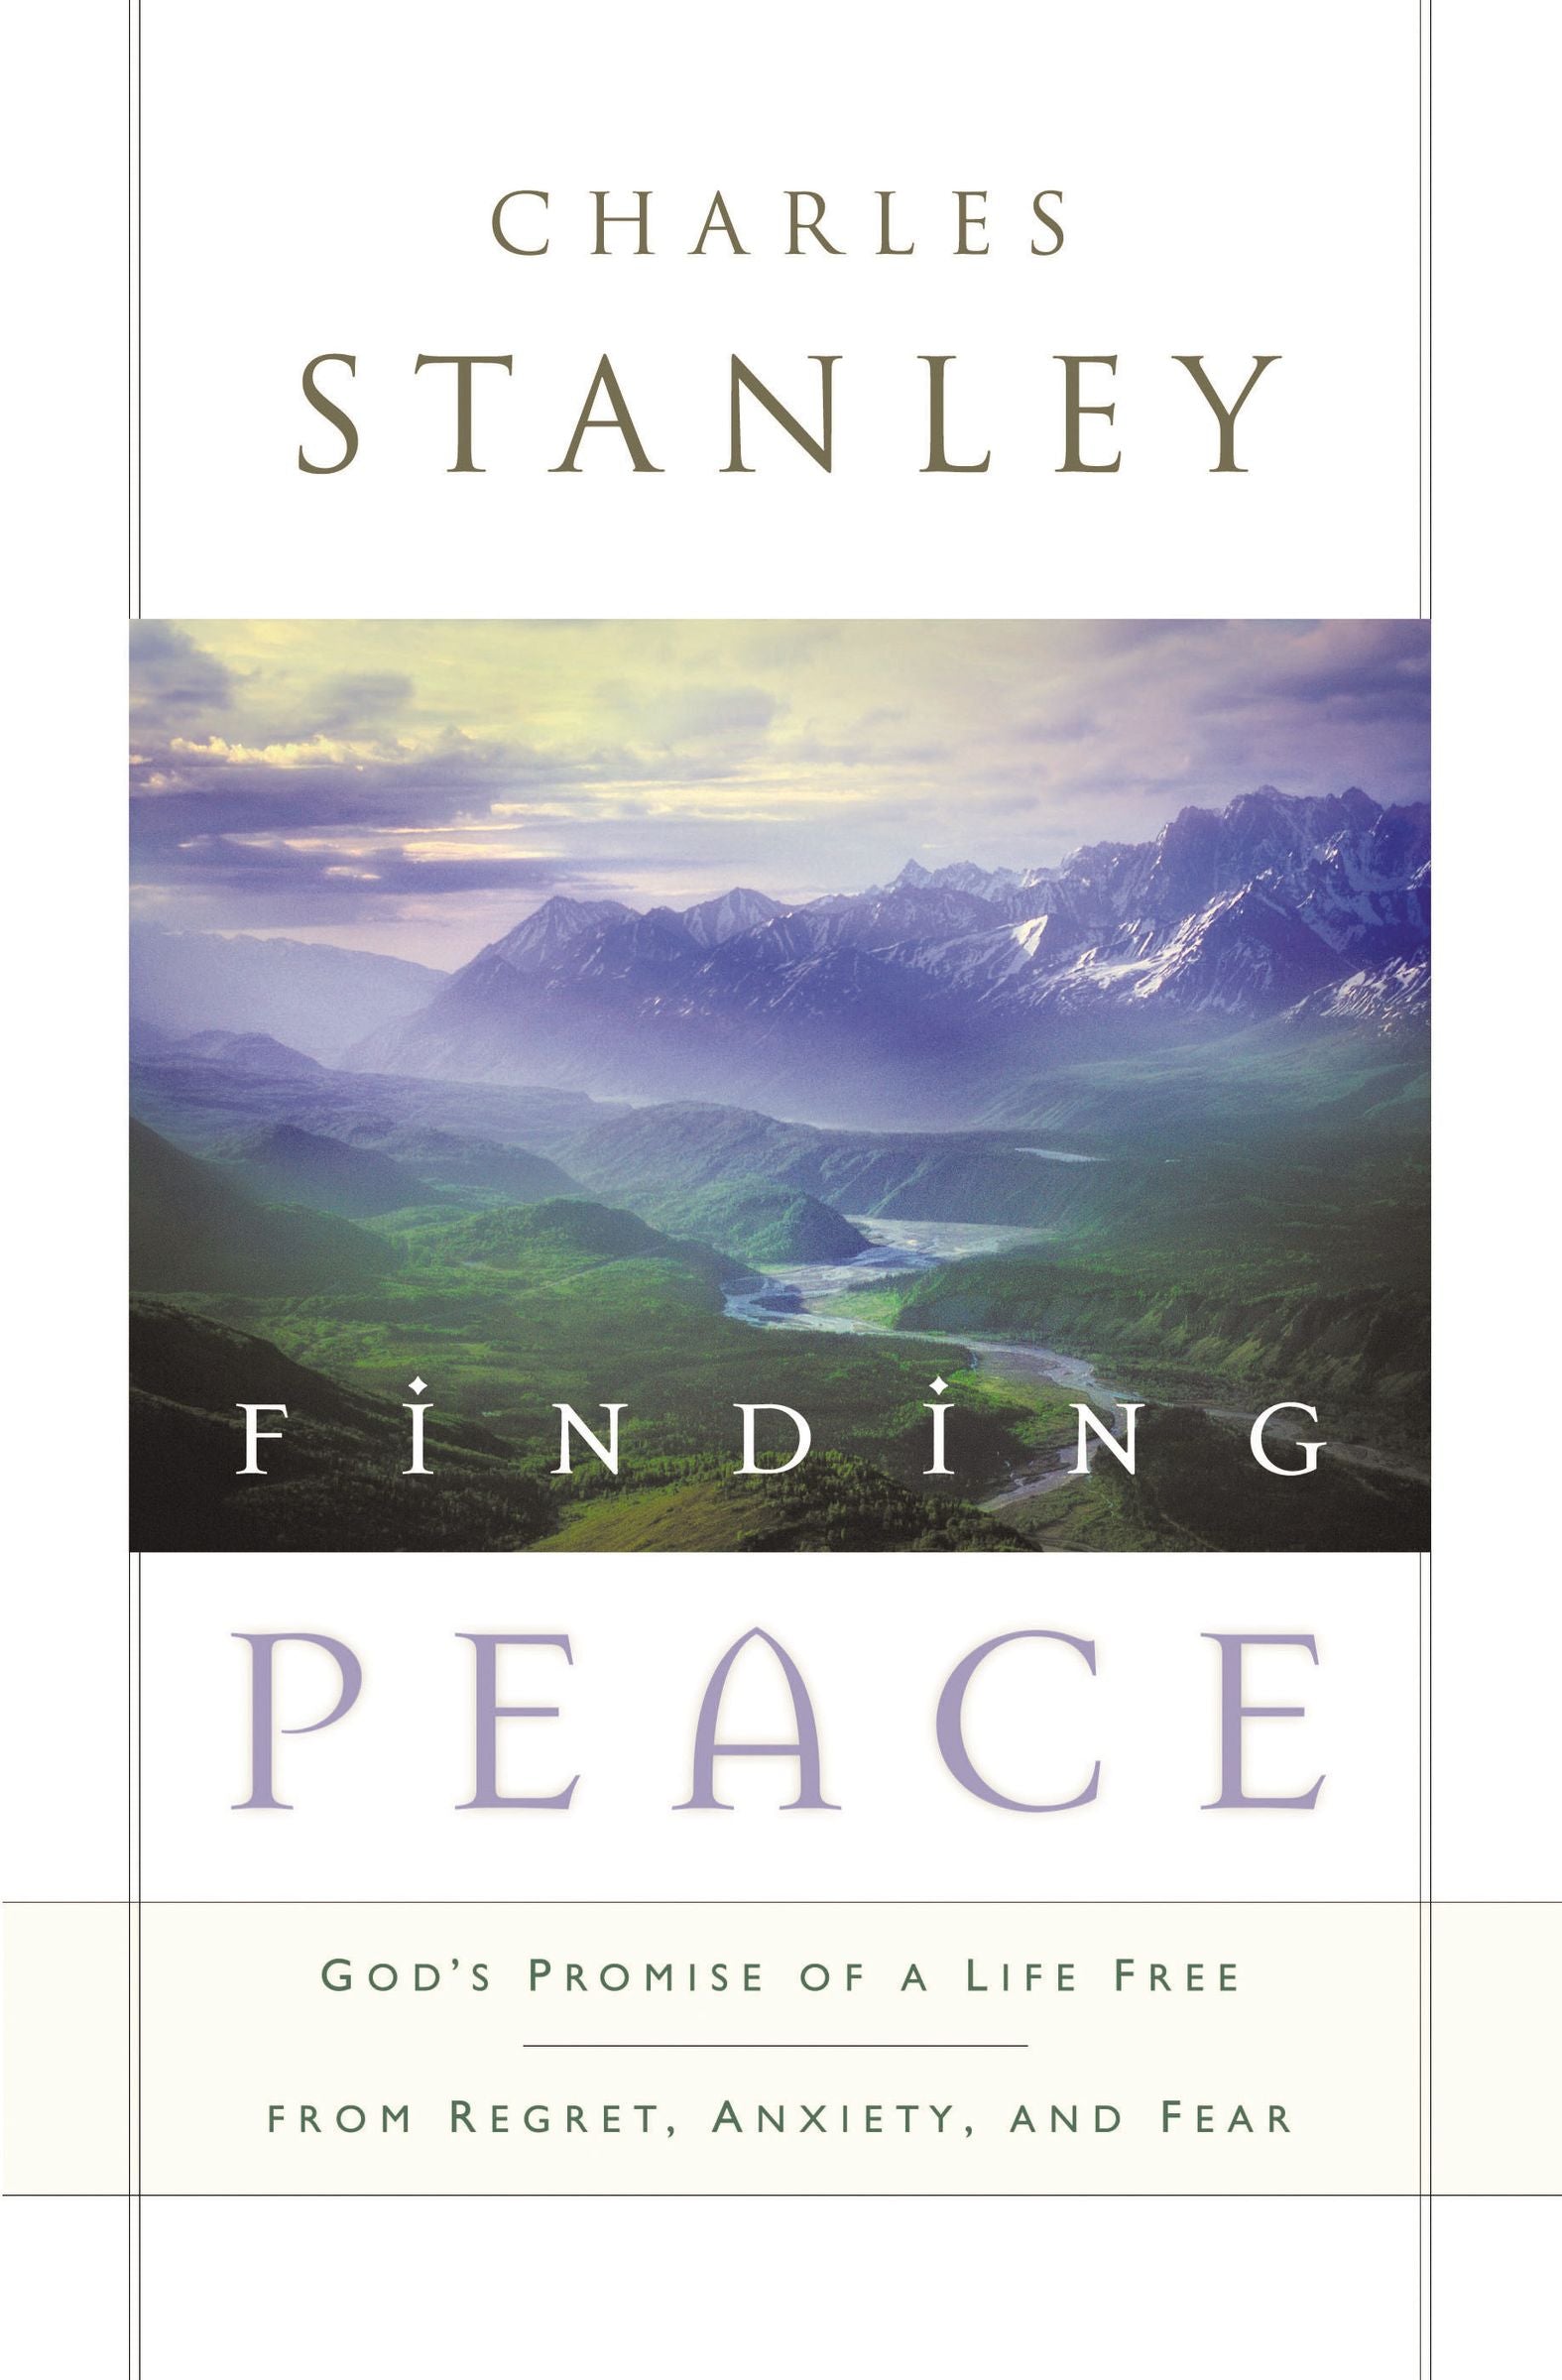 Image of Finding Peace other